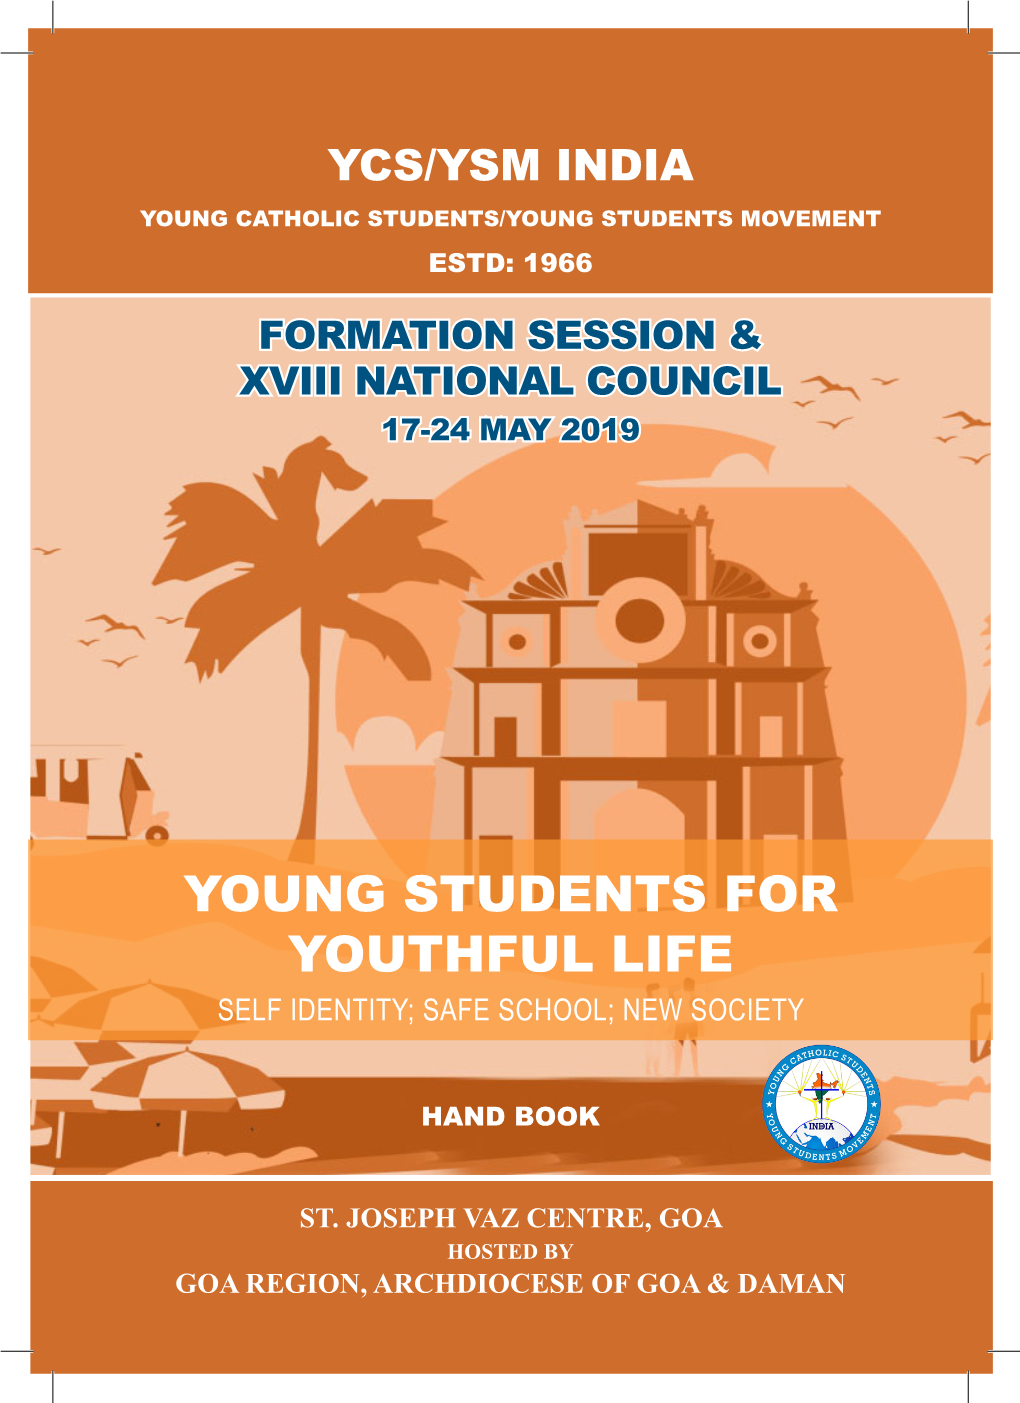 Hand Book:FORMATION SESSION & XVIII NATIONAL COUNCIL (17-24 MAY 2019)